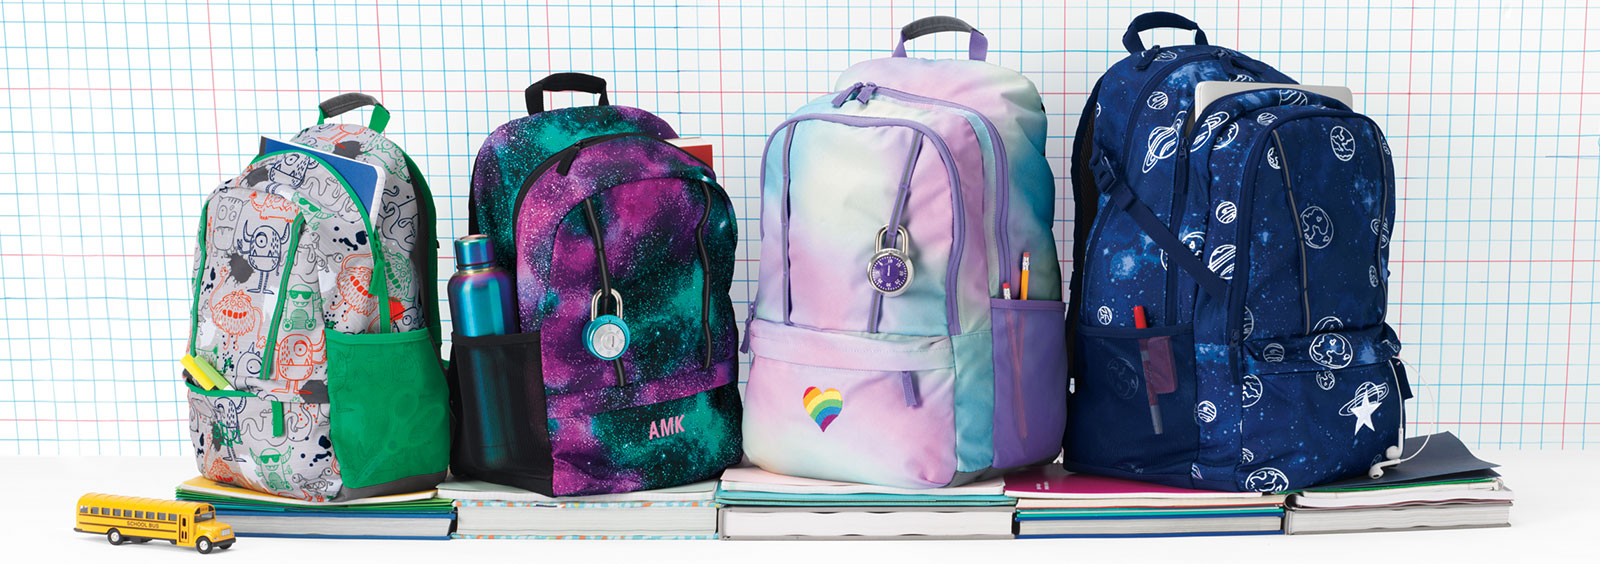 From Middle School to College: how one backpack became a key part of the journey.